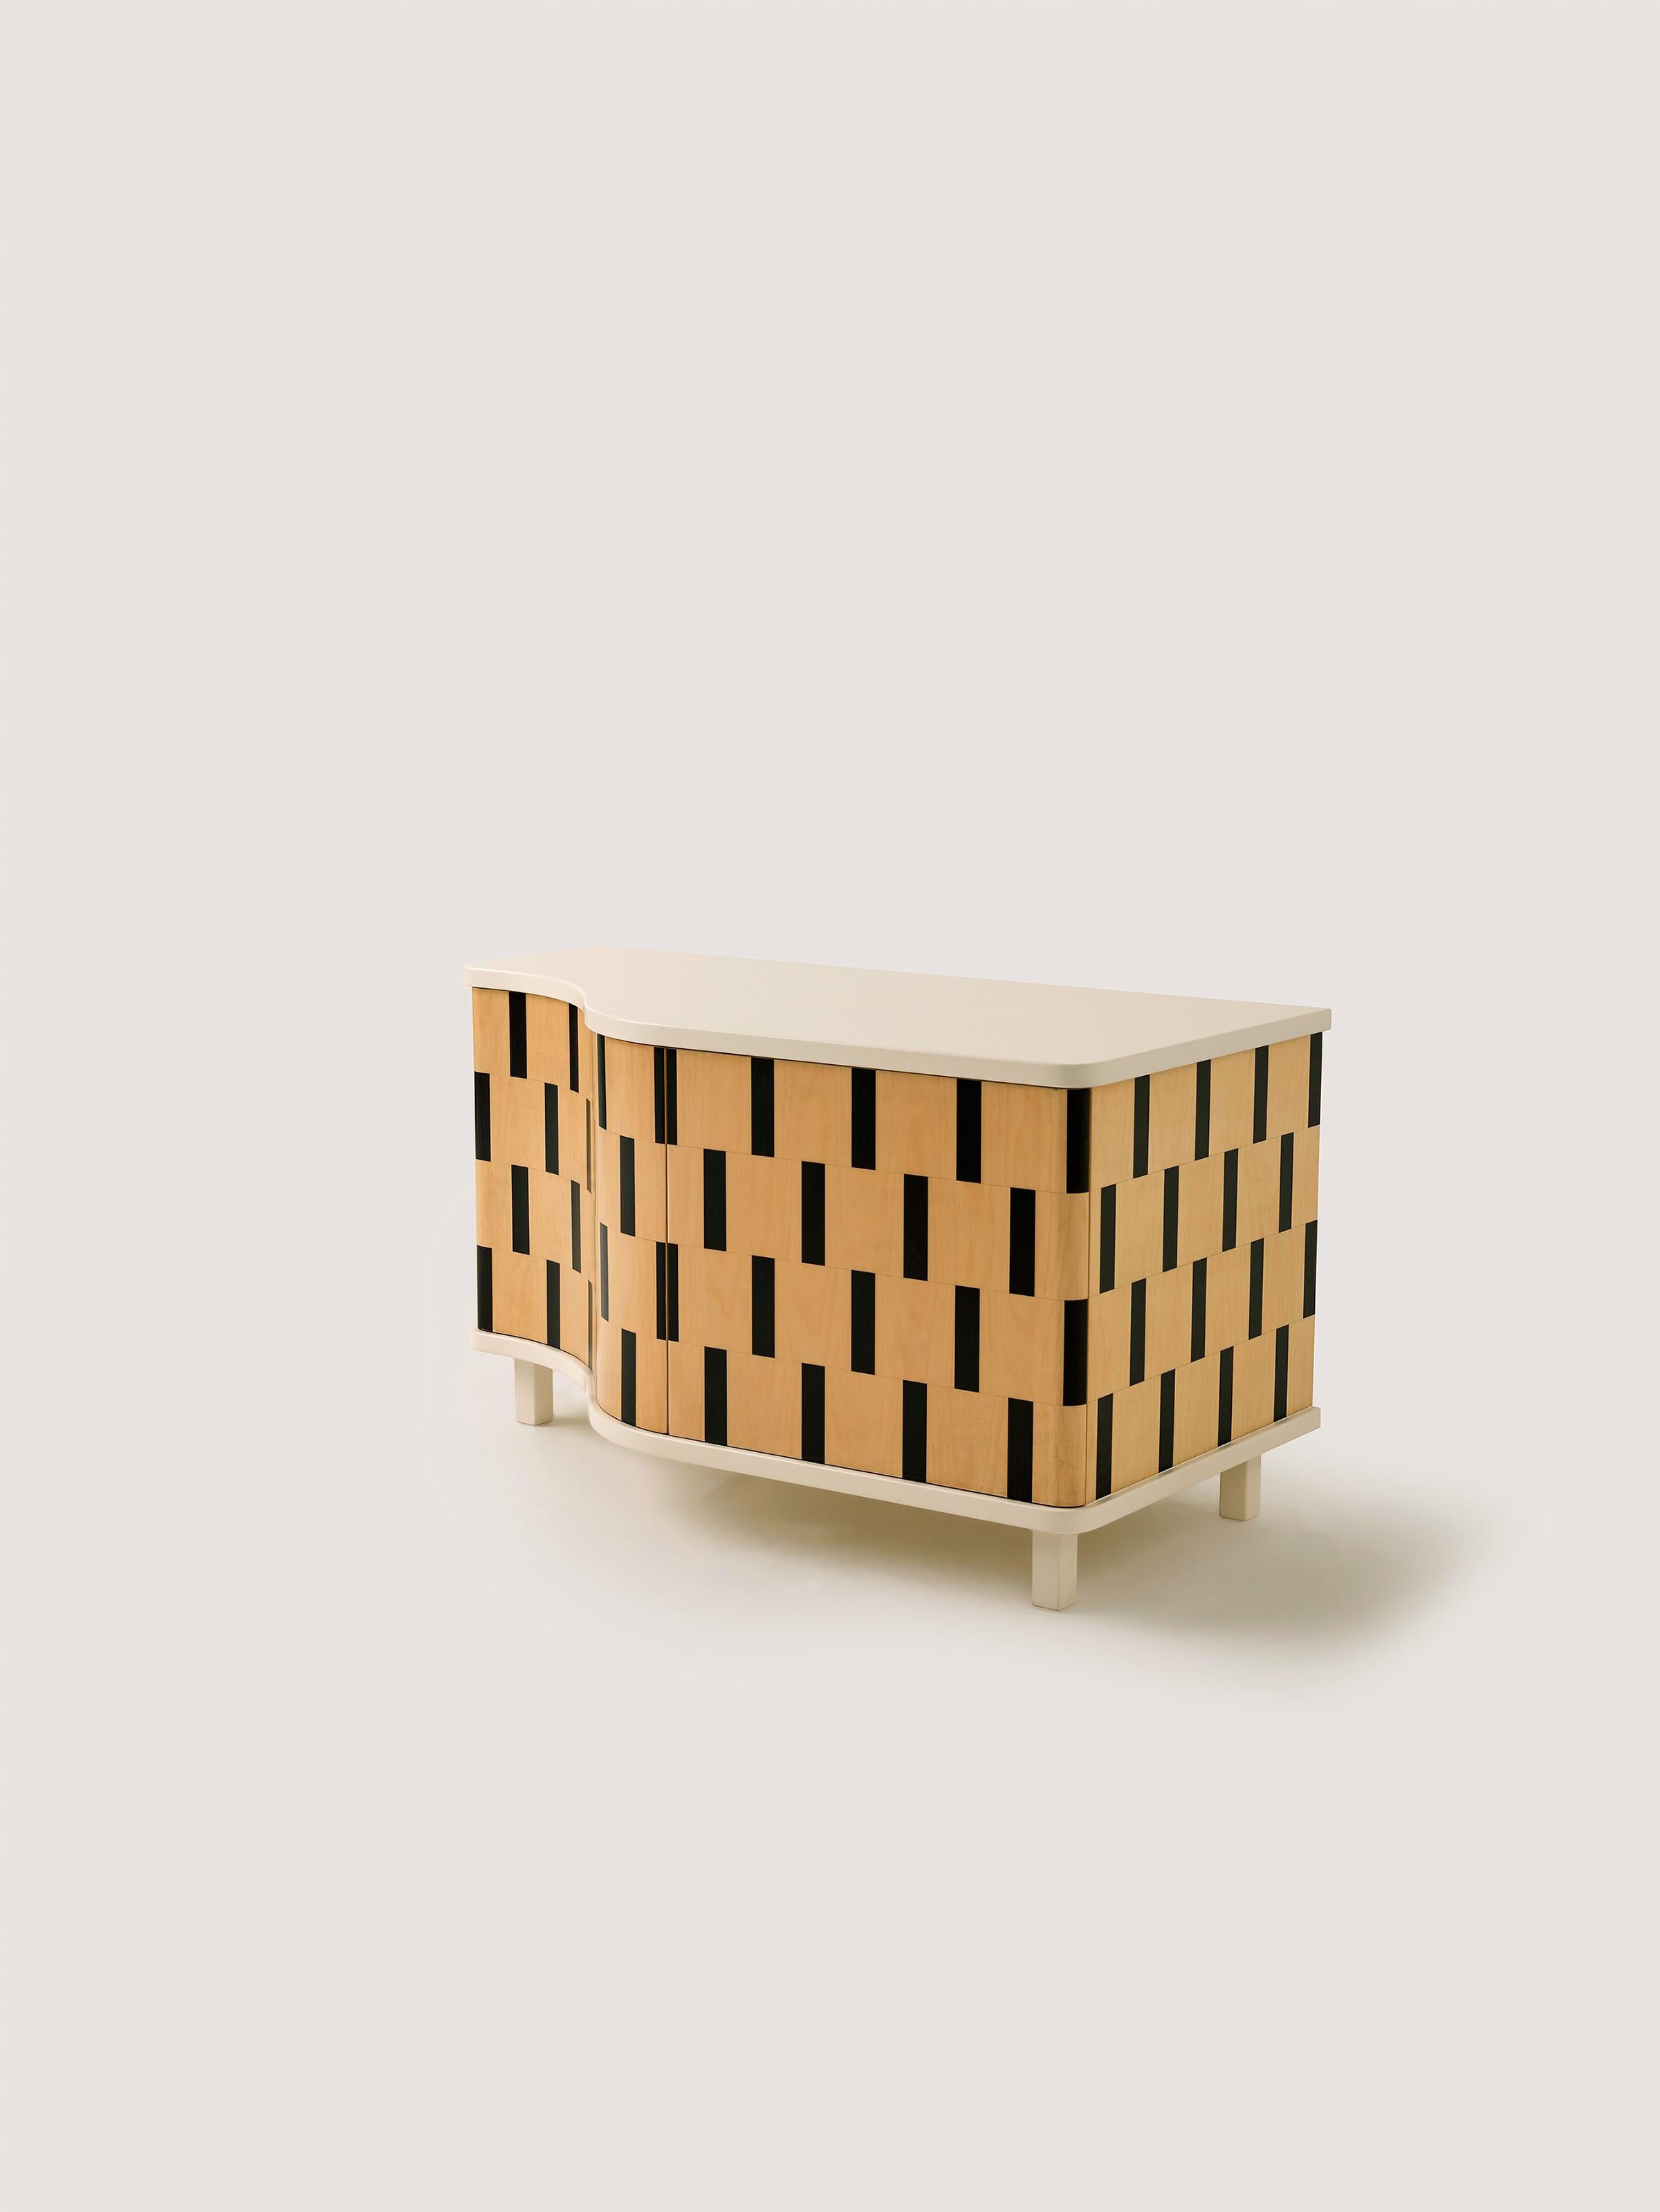 This exclusive credenza is originally designed as a custom shoe cabinet. It is uniquely created by assembling striped geometric wooden veneer pieces together, portraying a 3D illusion.

“Rayas” has been made by using traditional marquetry